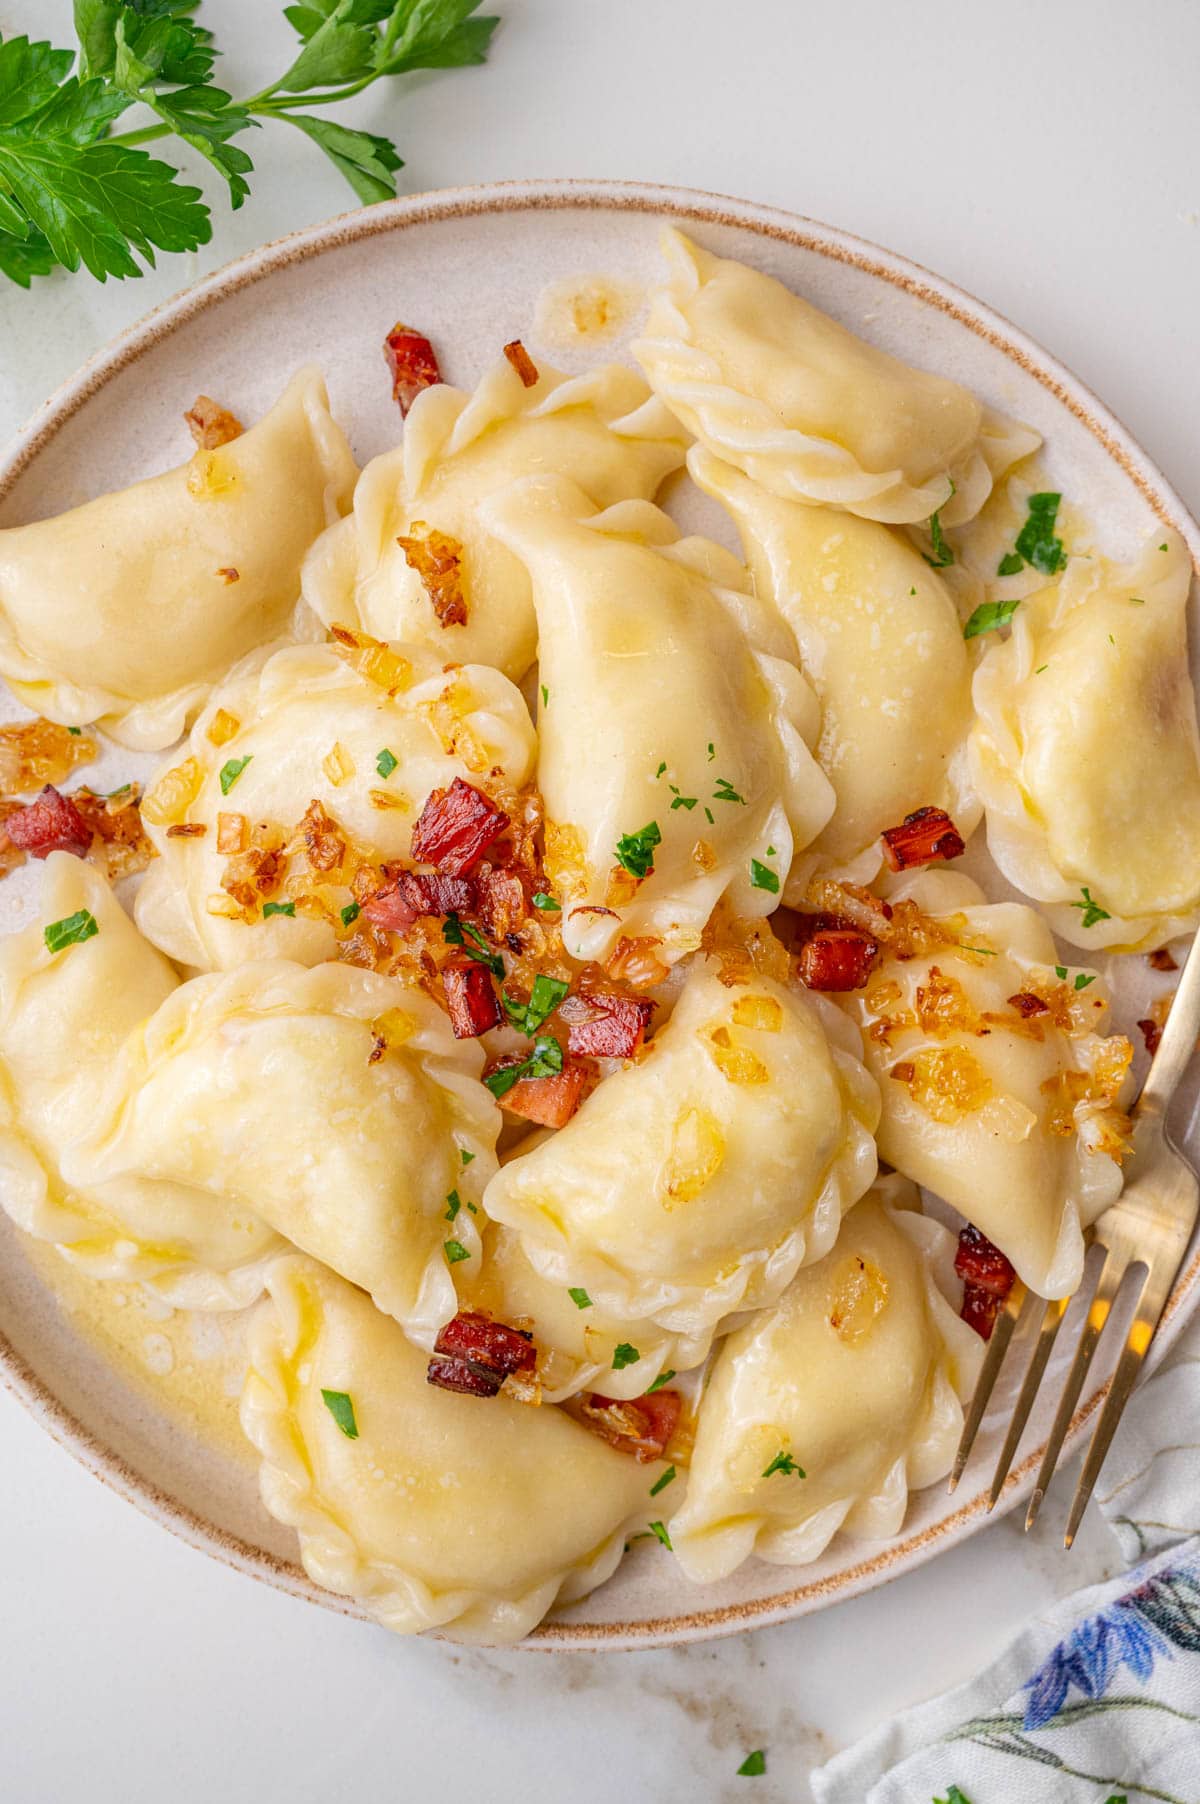 Potato and cheese pierogi topped with fried bacon and onions on a beige plate.